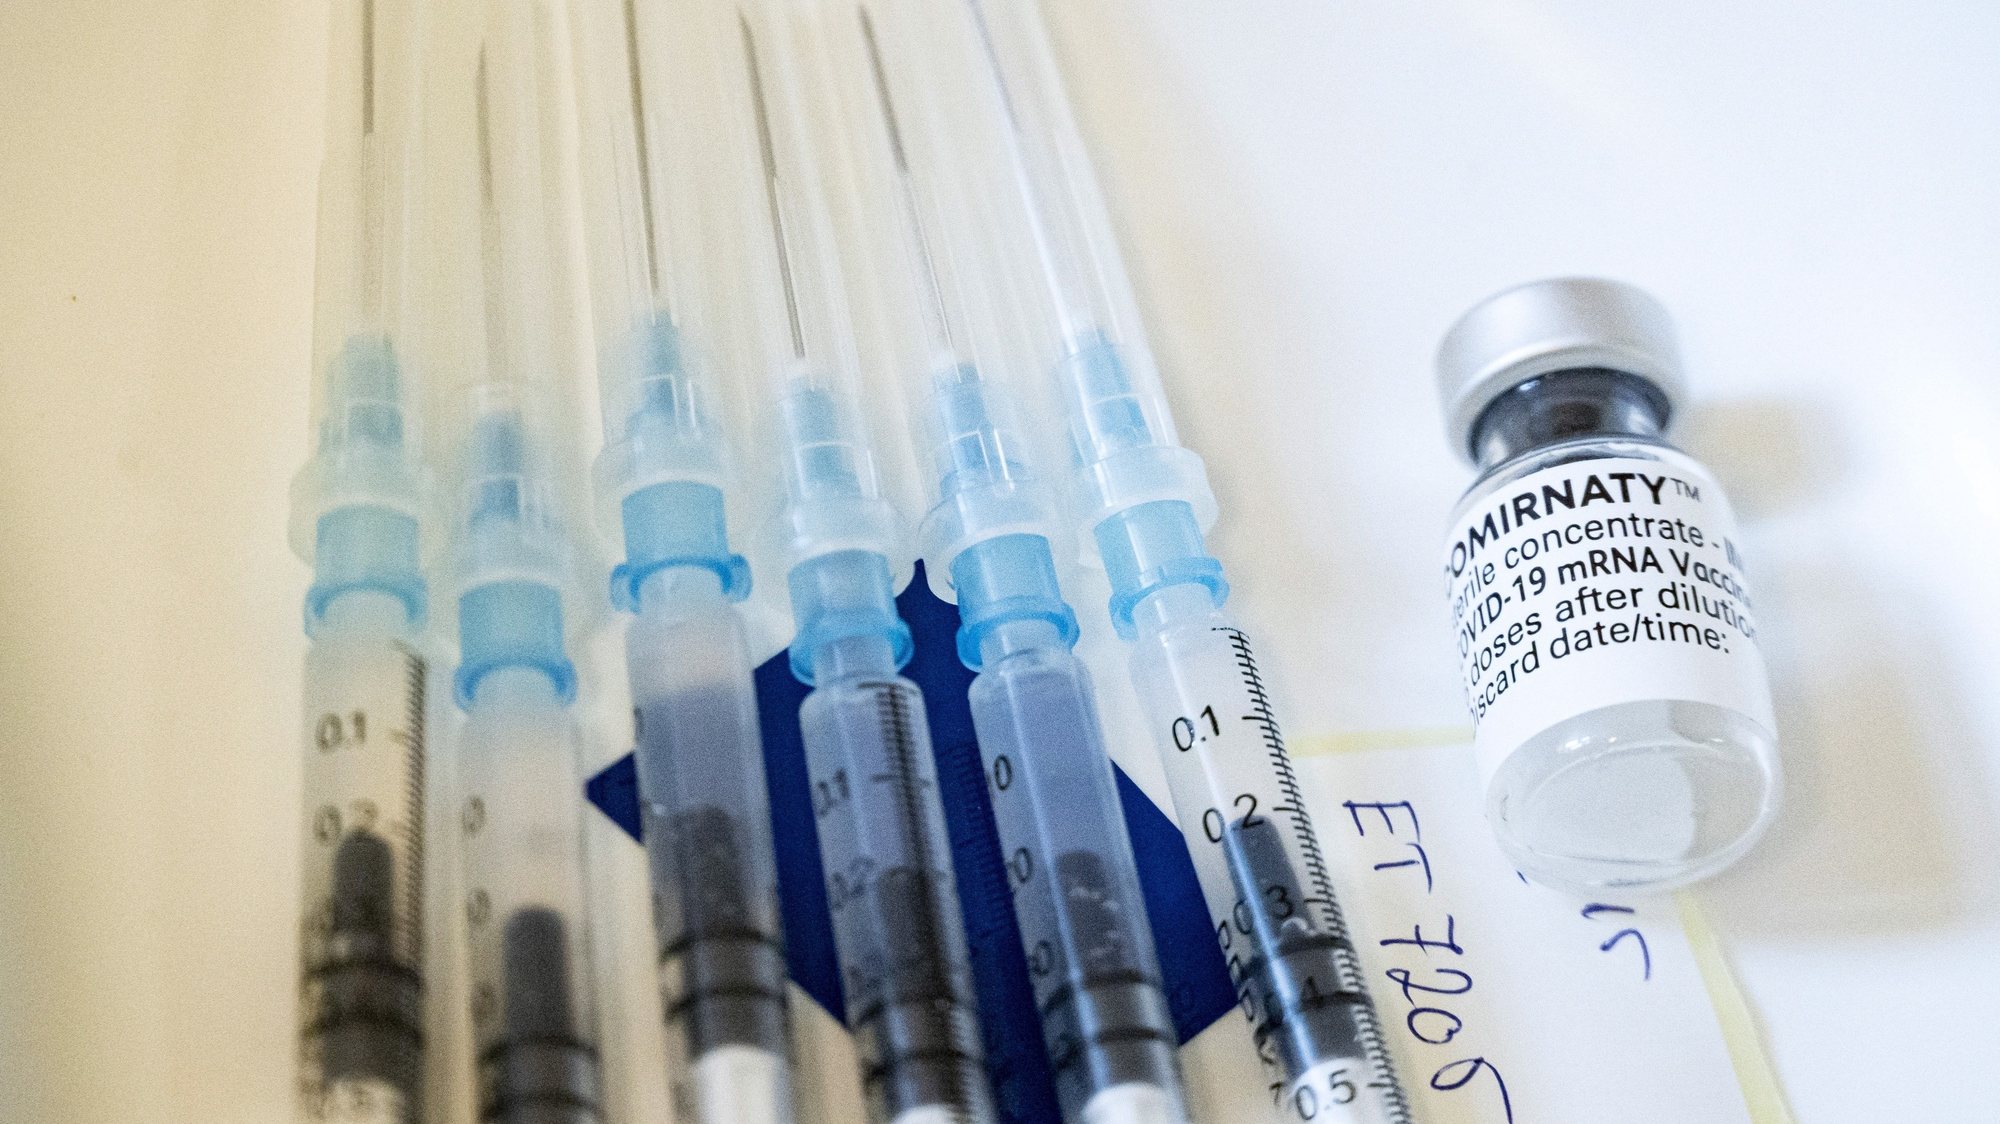 epa09110650 Syringes prepared to inject the Pfizer-BioNtech vaccine against the SARS-CoV-2 coronavirus are seen at Szent Imre Training Hospital in Budapest, Hungary, 01 April 2021, as the vaccination campaign continues in the country.  EPA/Zsolt Szigetvary HUNGARY OUT